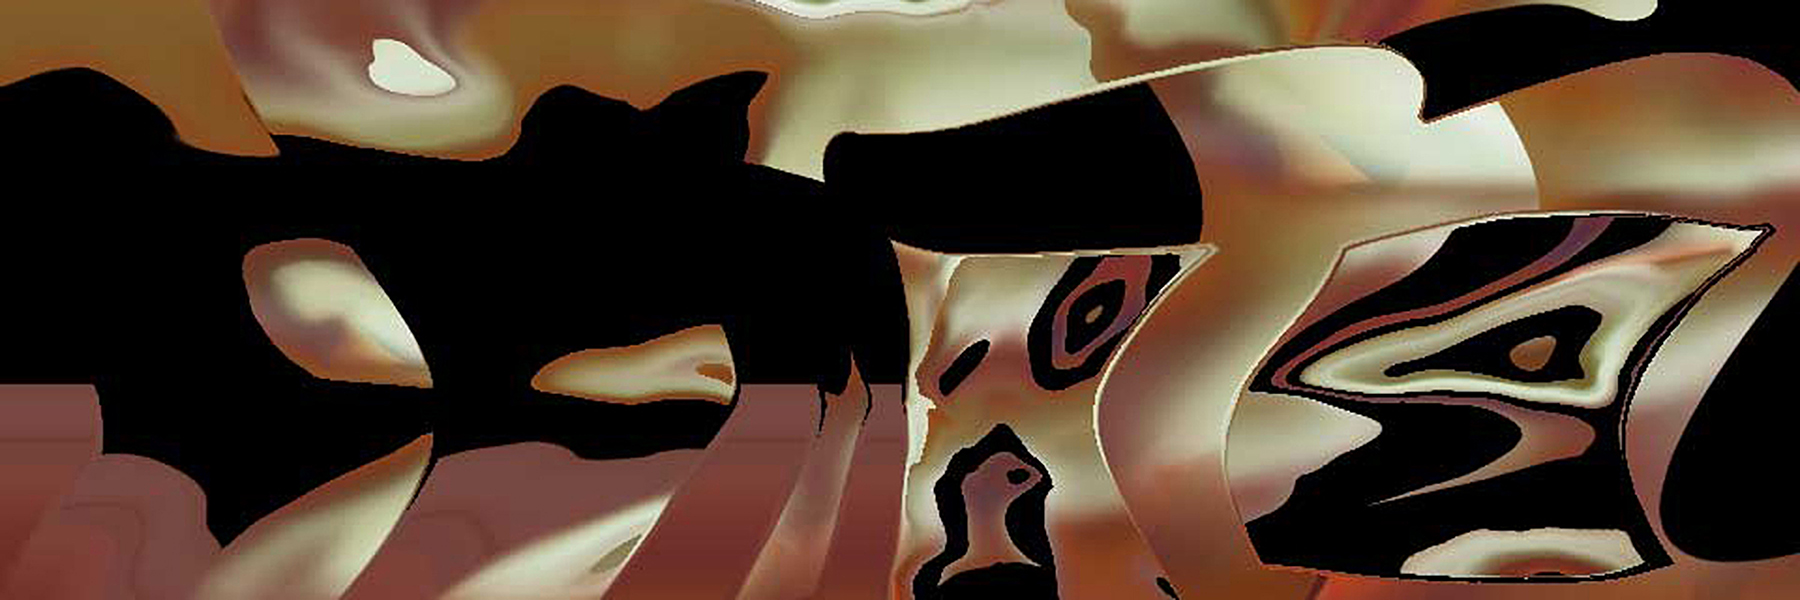 Colorful and dynamic GIFs by artist duo Catag, specifically created for the NFT marketplace in their signature blend of street and electronic art. The unique abstract patterns with vibrant hues create a mesmerizing and engaging visual experience, showcasing Catag's creative and technical abilities. Available for acquisition on the official TokToMe website and various NFT marketplaces.